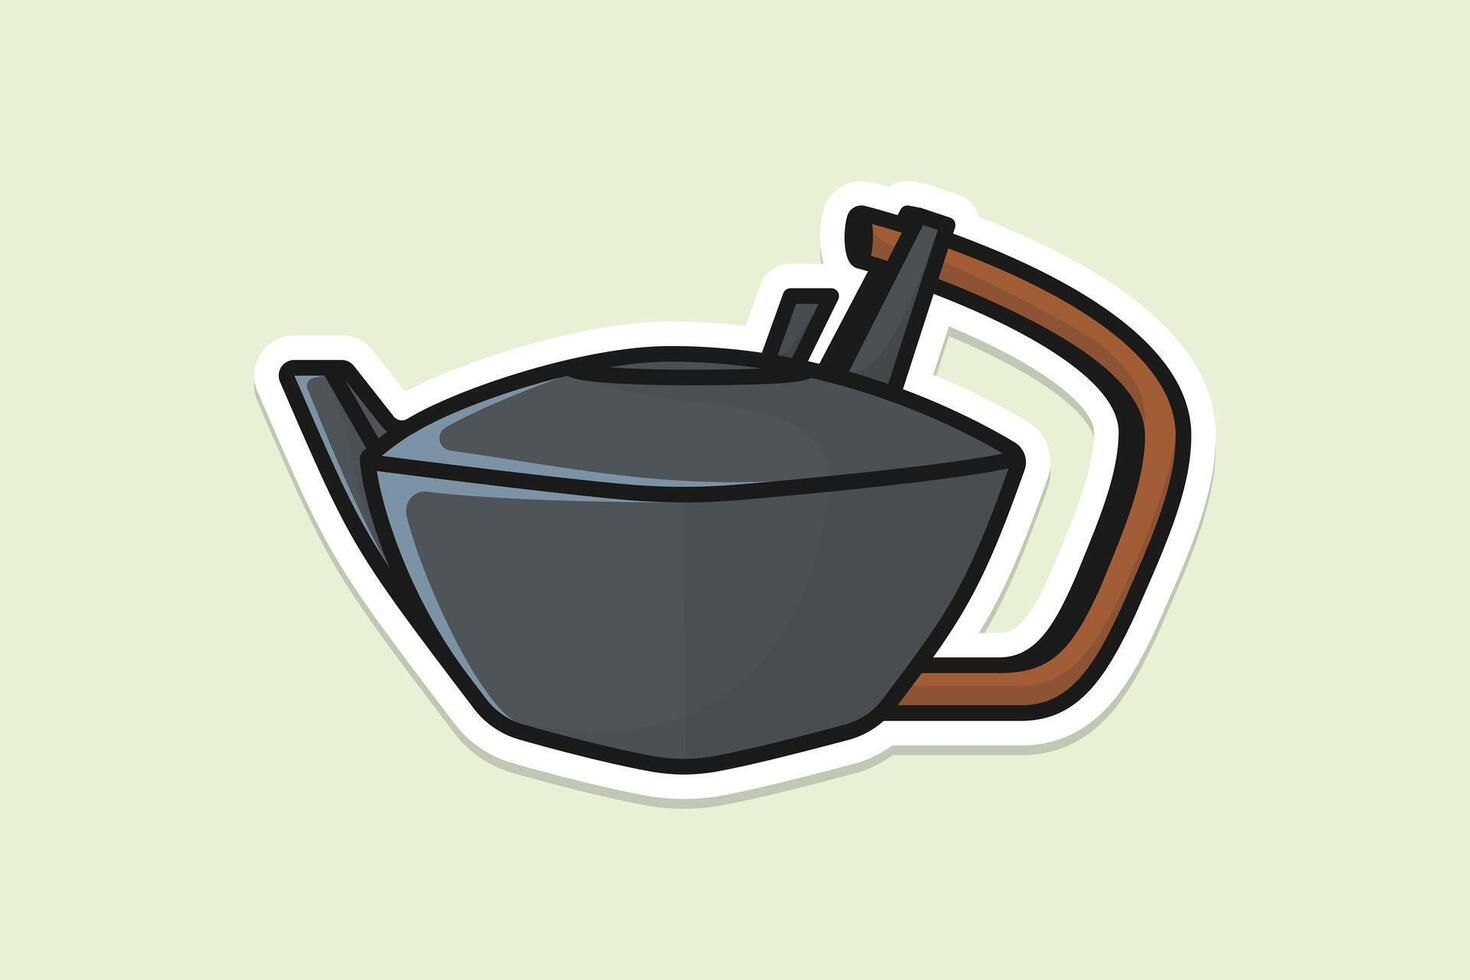 Beautiful Grey Tea Kettle sticker design vector illustration. Kitchen interior object icon concept. Morning Tea Teapot with closed lid sticker design with shadow.